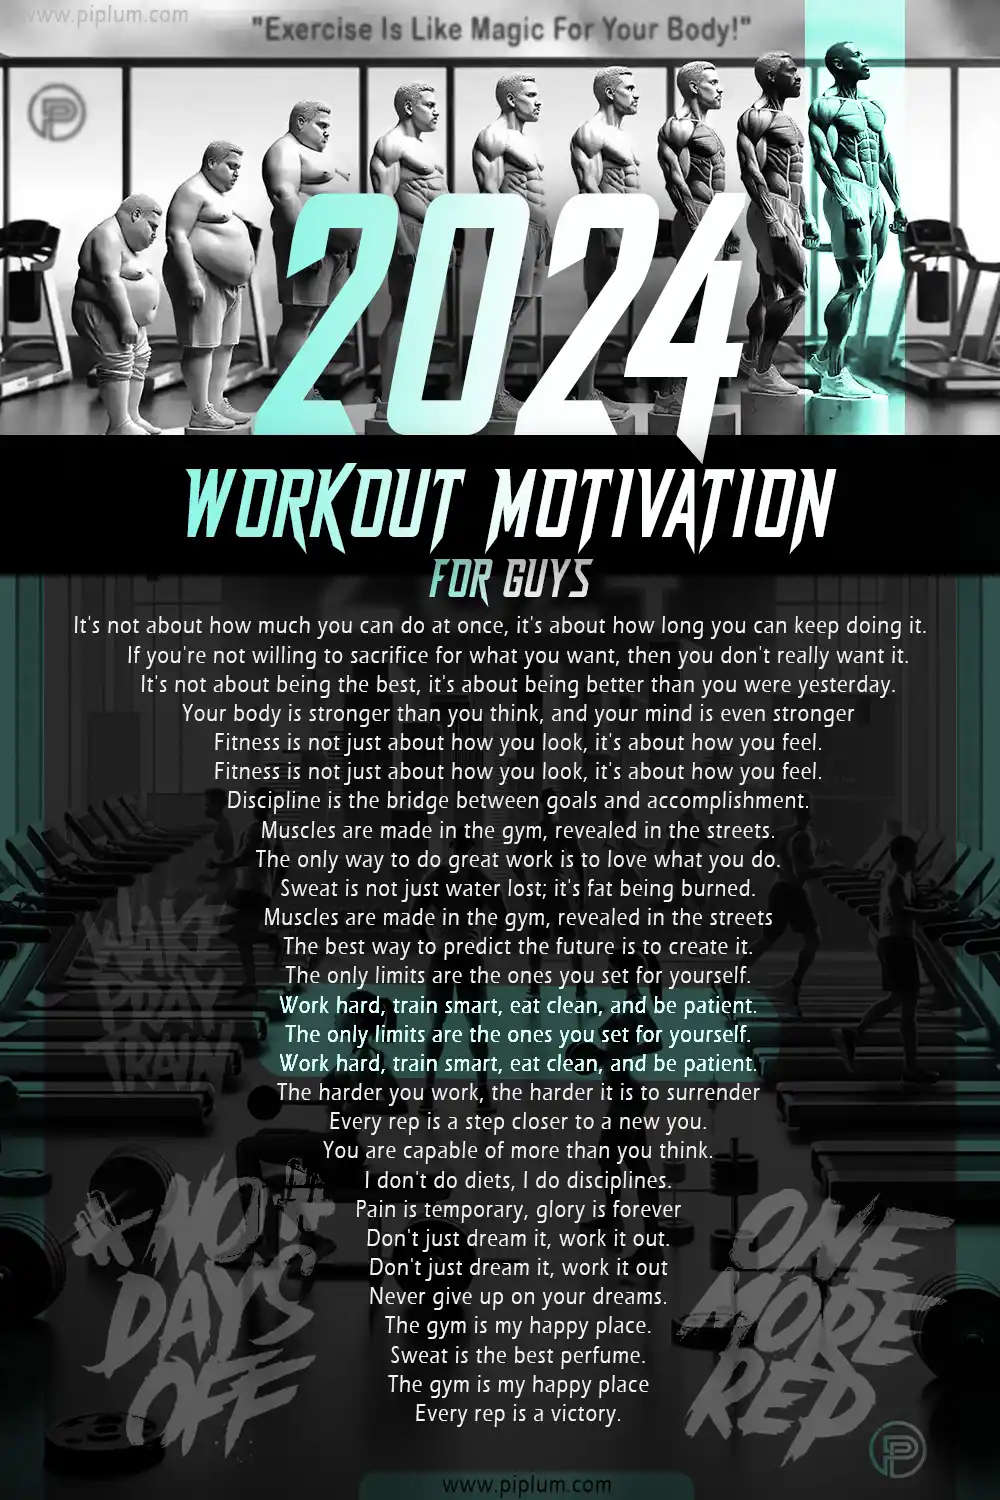 Motivational workout poster to inspire guys to hit the gym and exercise. 